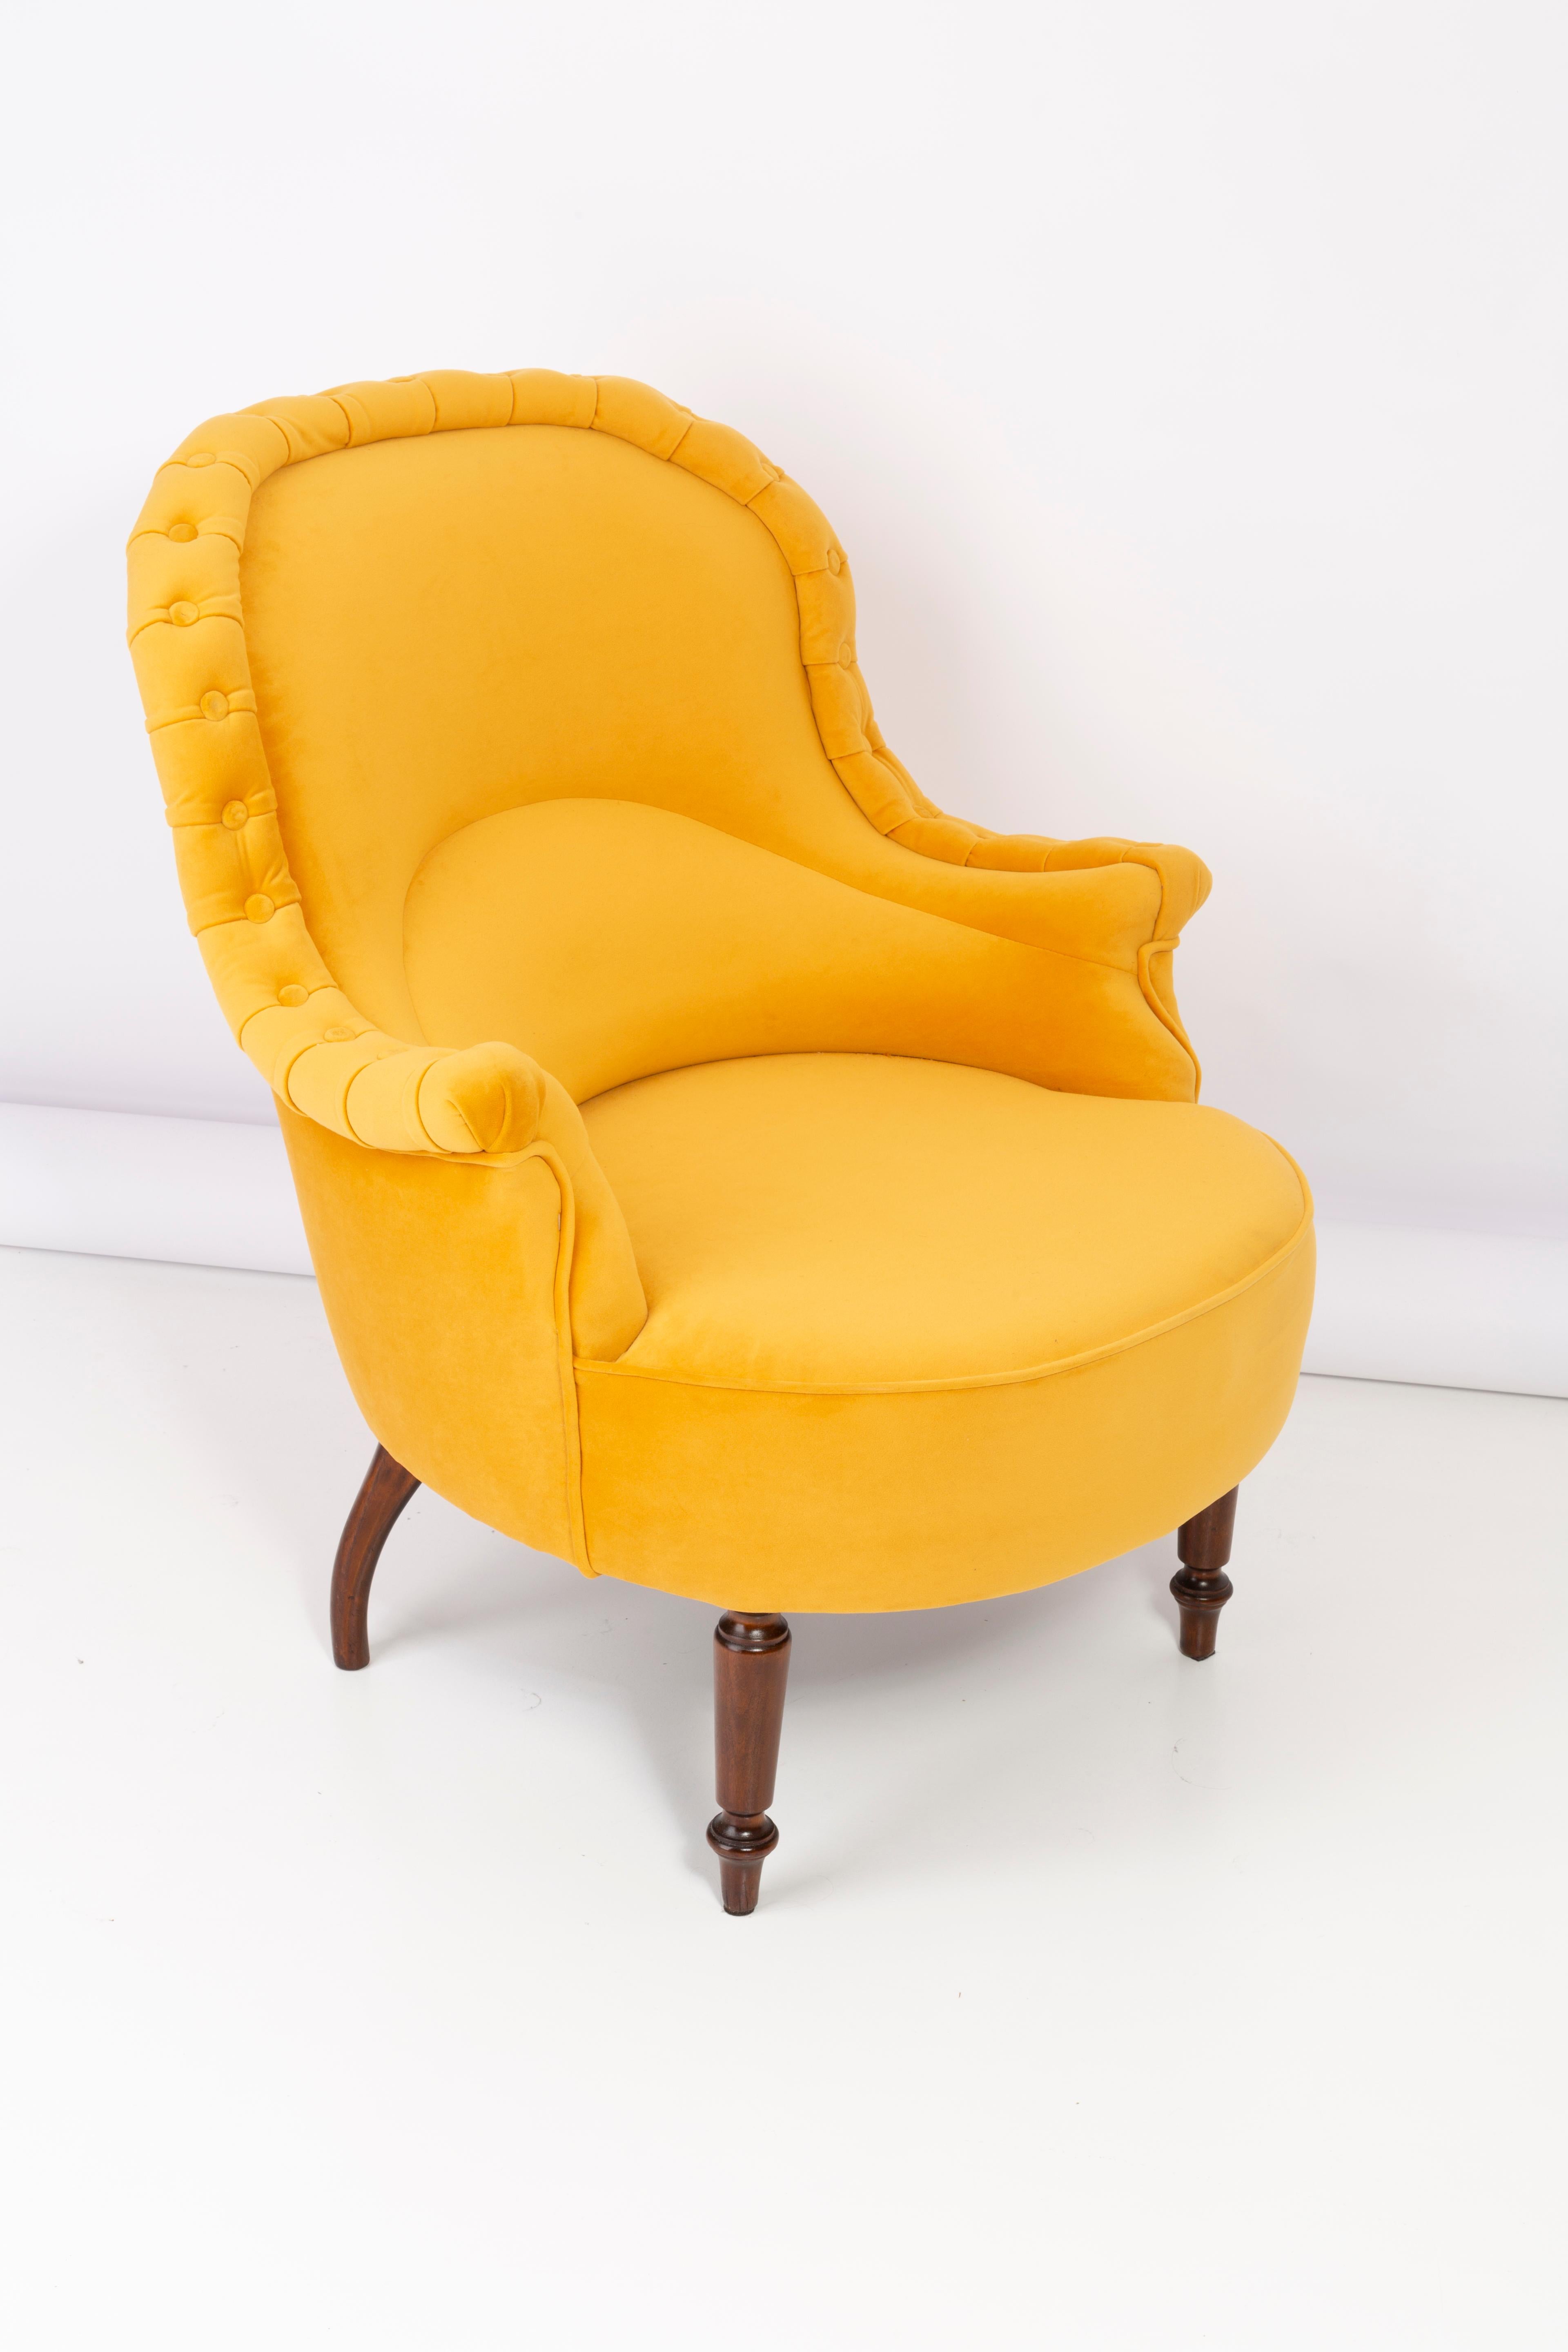 Velvet Pair of Unique Yellow Mustard Armchairs, 1930s, Germany For Sale